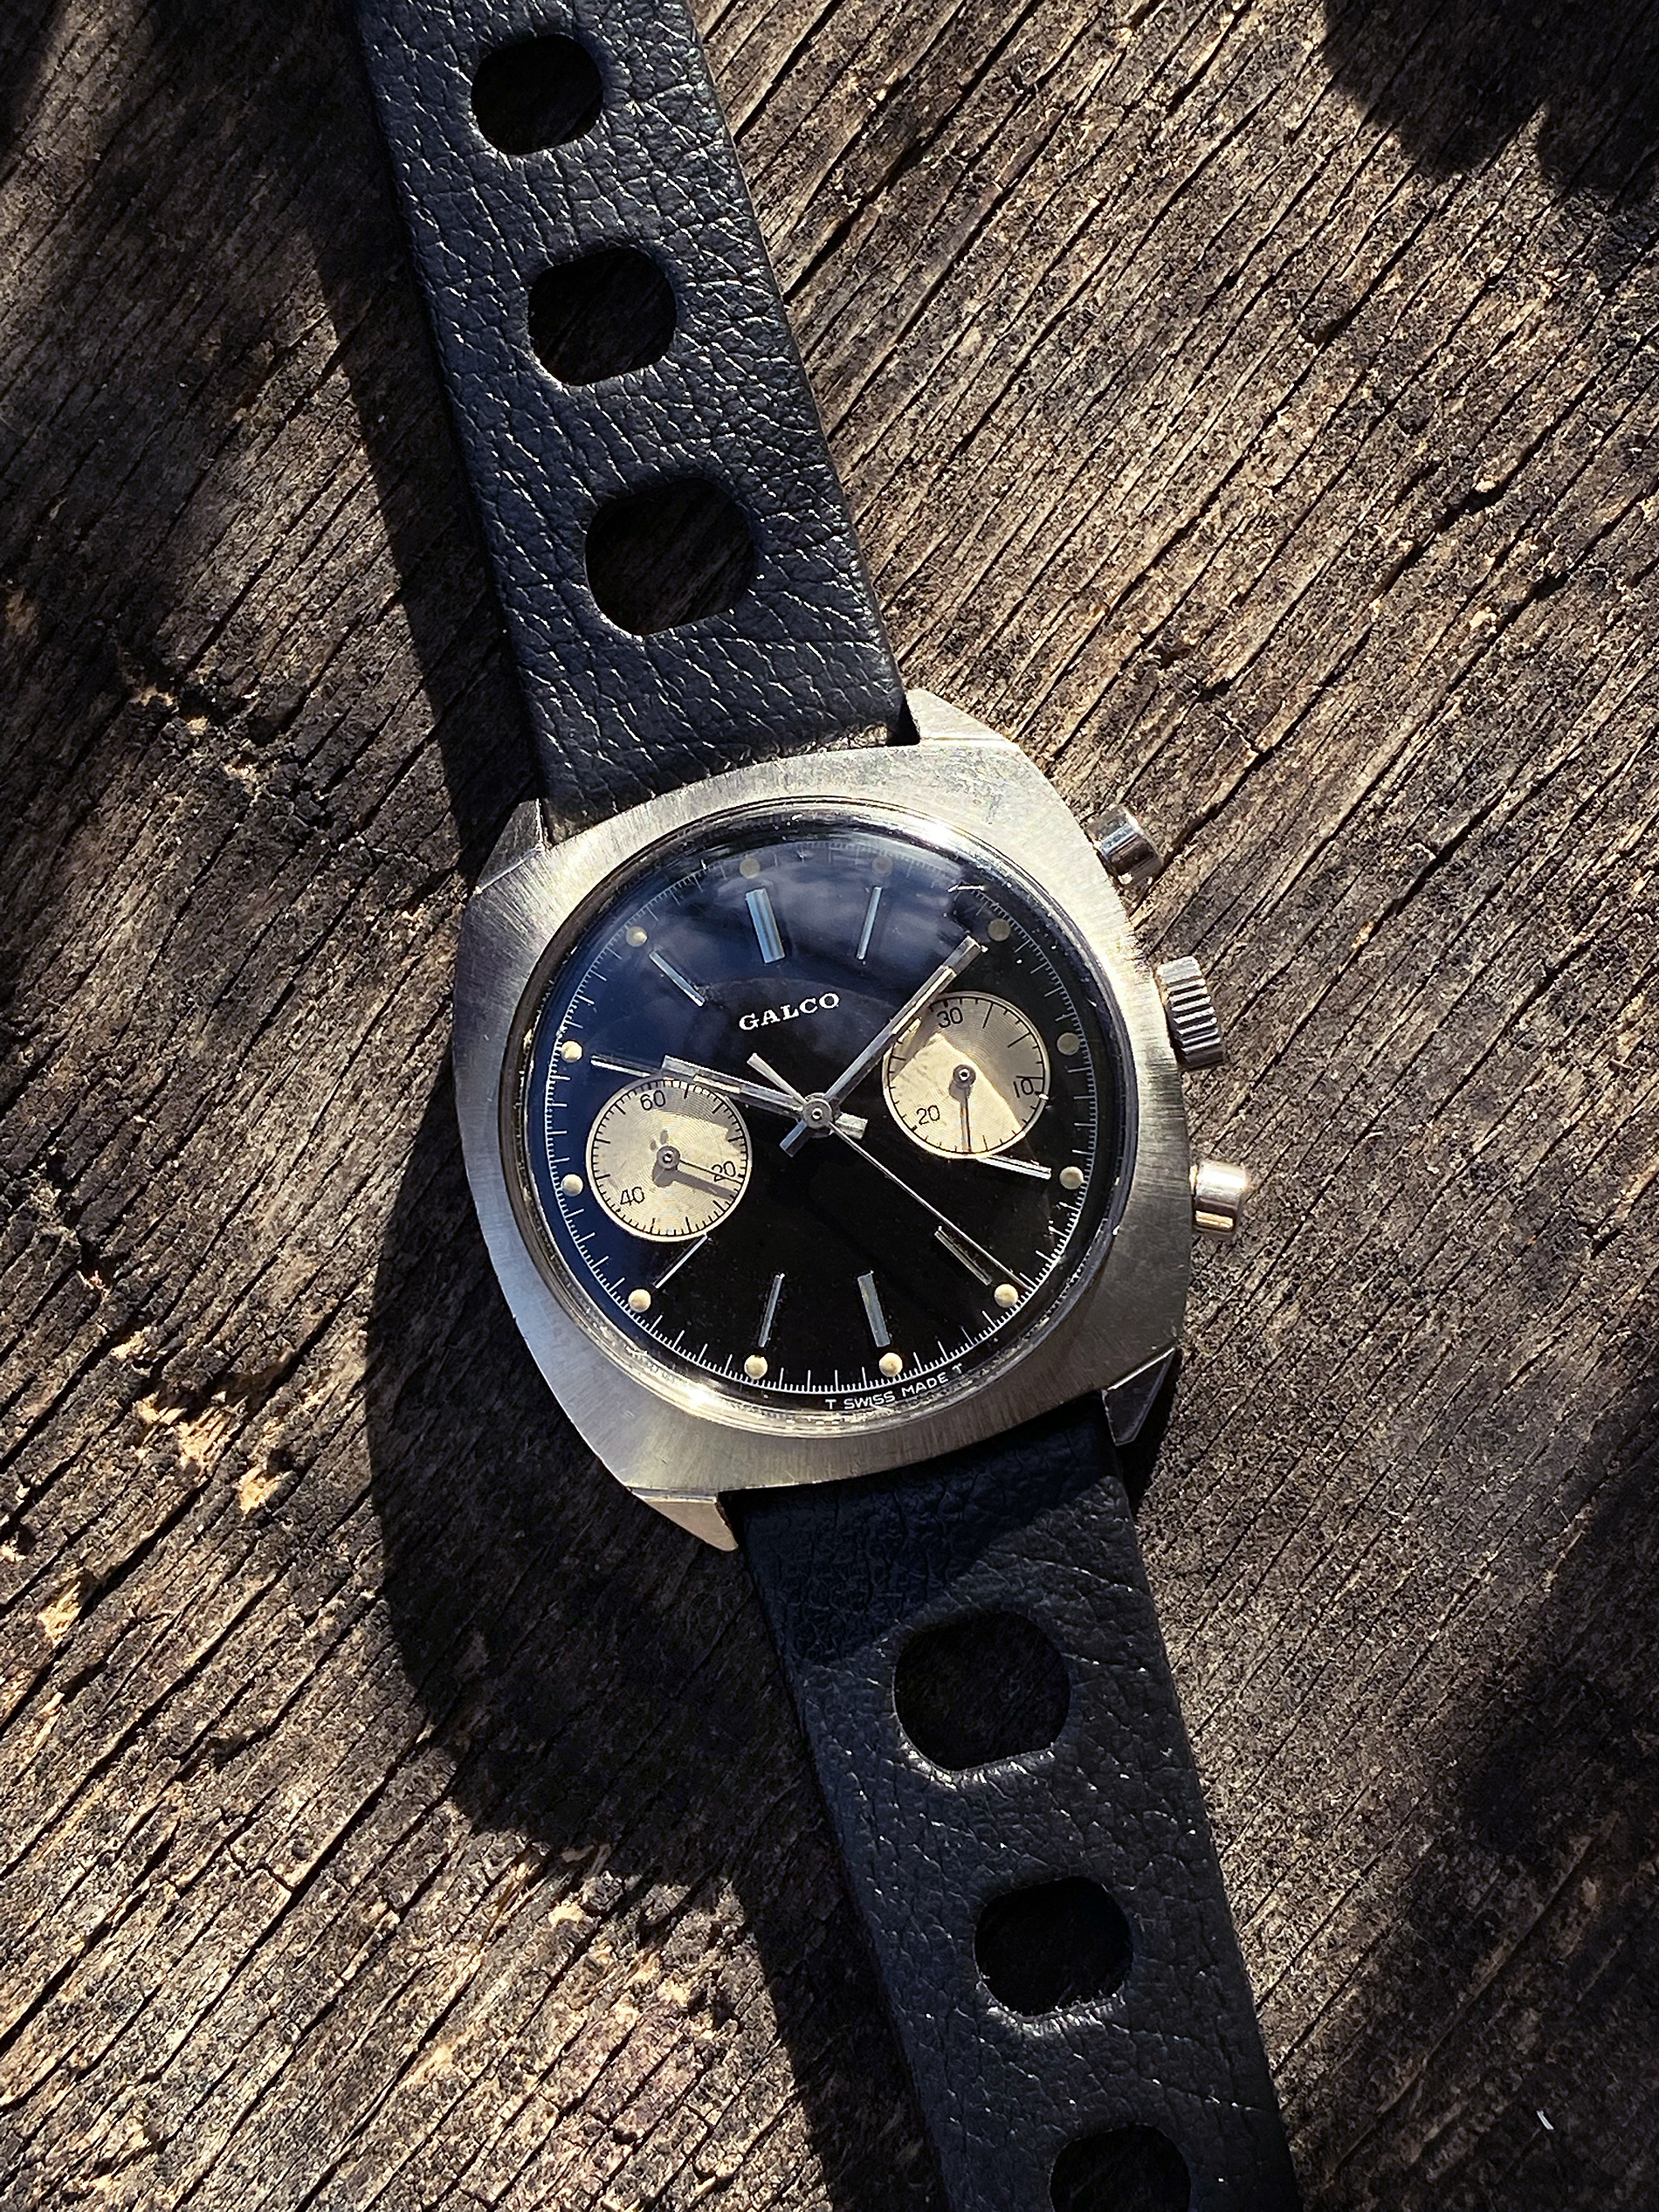 Galco / Gallet Chronograph 1960s